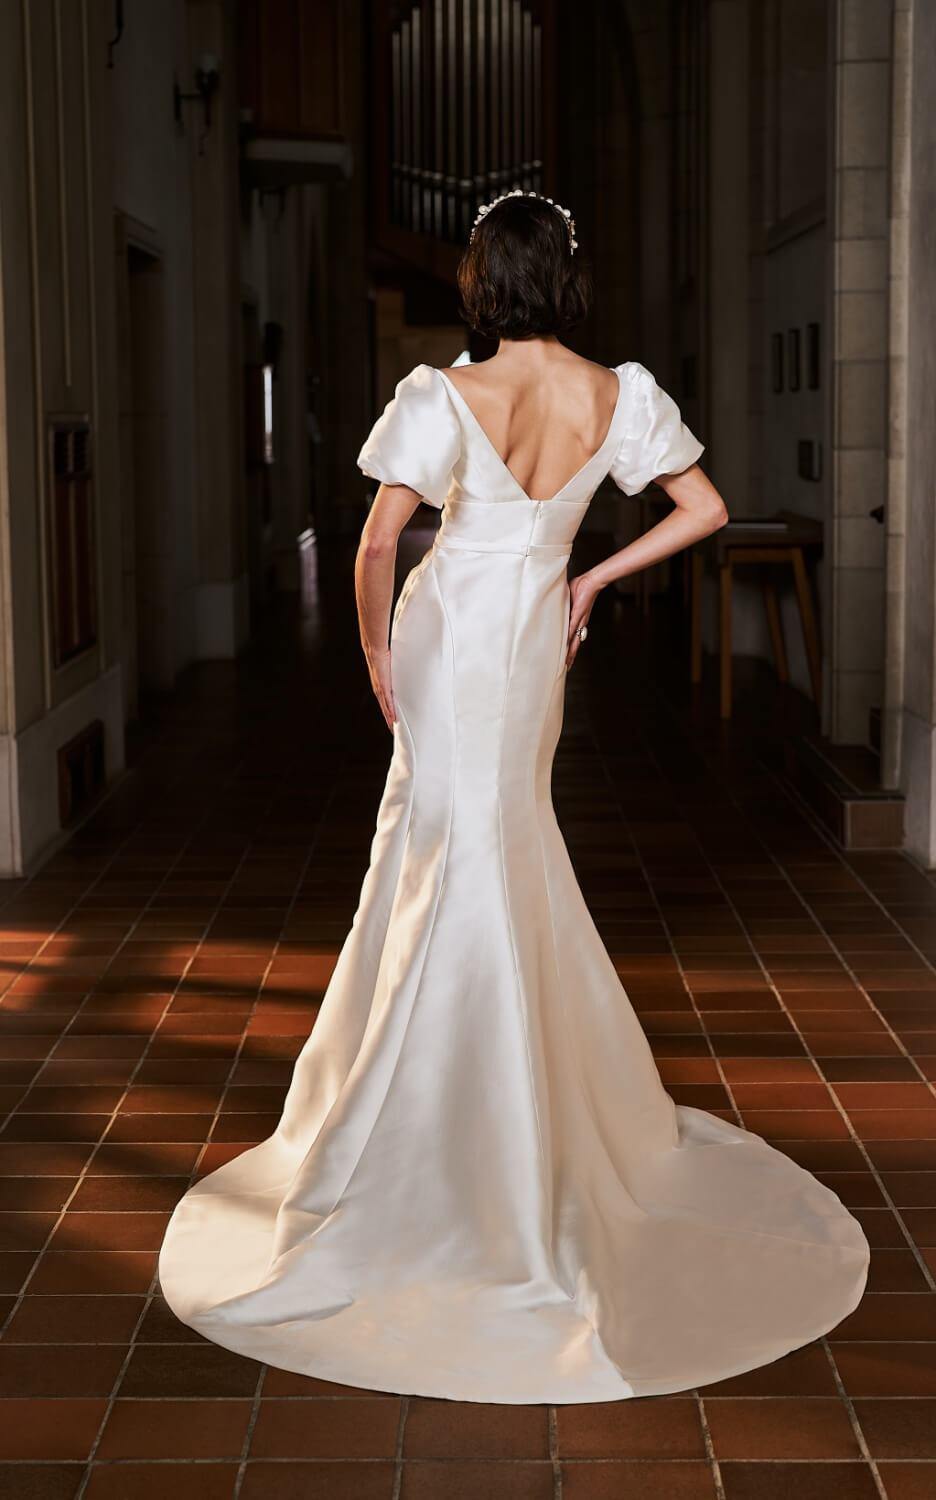 Model wearing Sydney wedding dress with statement sleeves from the Royal collection